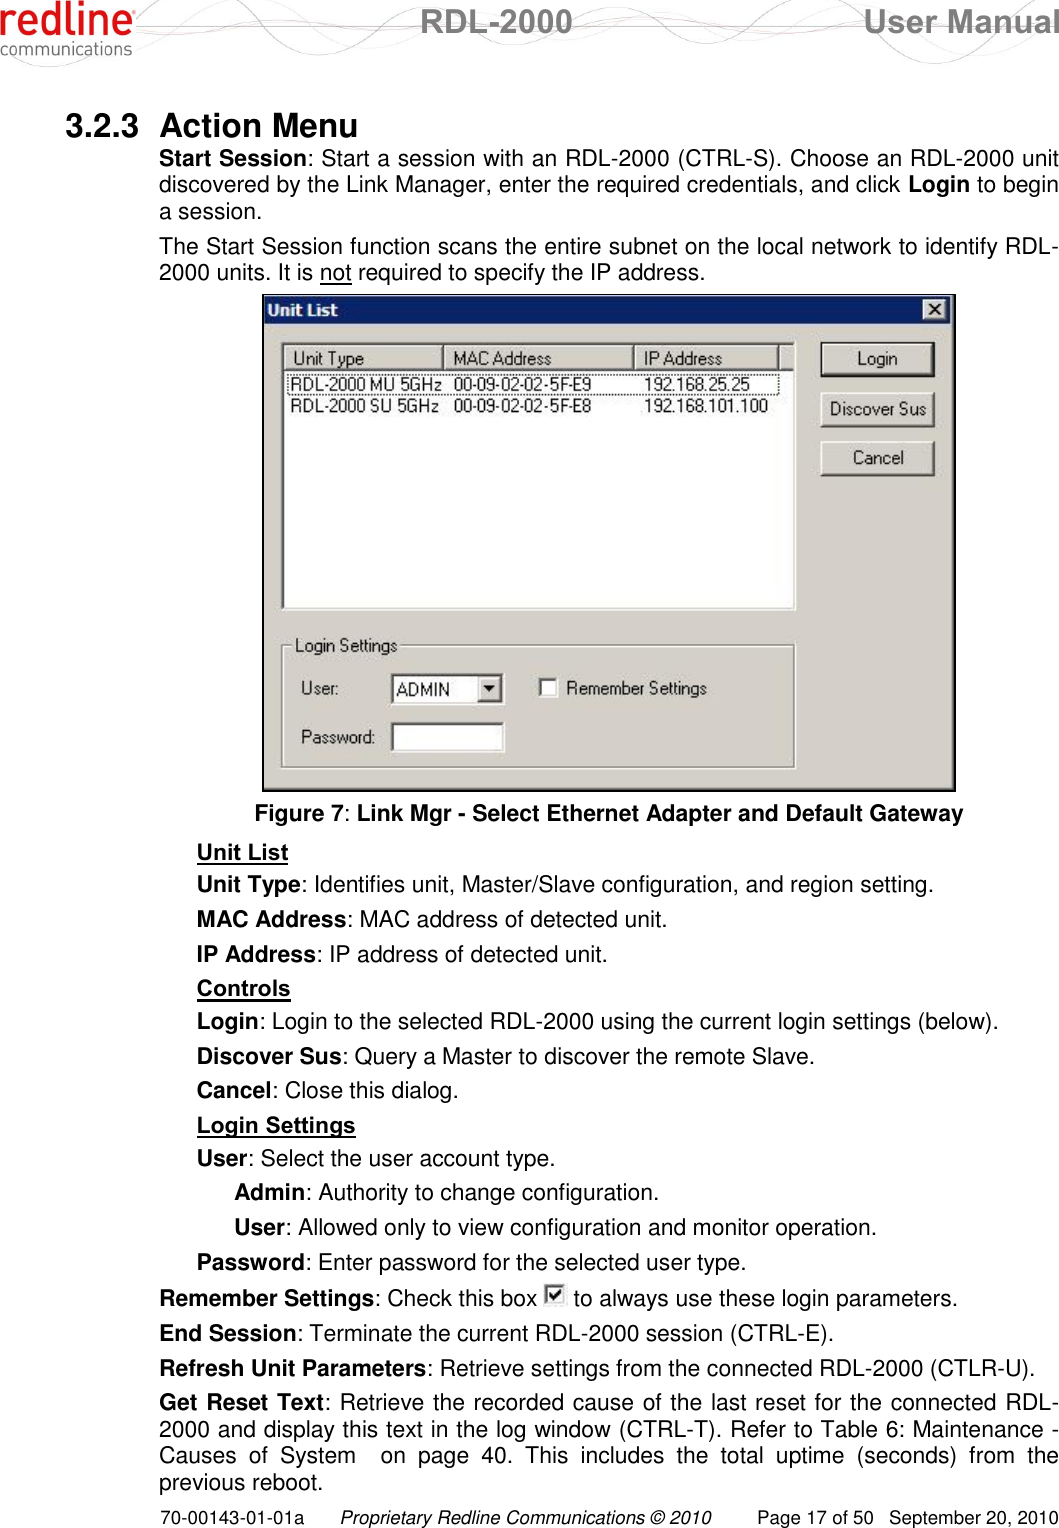  RDL-2000  User Manual 70-00143-01-01a Proprietary Redline Communications © 2010  Page 17 of 50  September 20, 2010 3.2.3  Action Menu Start Session: Start a session with an RDL-2000 (CTRL-S). Choose an RDL-2000 unit discovered by the Link Manager, enter the required credentials, and click Login to begin a session. The Start Session function scans the entire subnet on the local network to identify RDL-2000 units. It is not required to specify the IP address.  Figure 7: Link Mgr - Select Ethernet Adapter and Default Gateway Unit List Unit Type: Identifies unit, Master/Slave configuration, and region setting. MAC Address: MAC address of detected unit. IP Address: IP address of detected unit. Controls Login: Login to the selected RDL-2000 using the current login settings (below). Discover Sus: Query a Master to discover the remote Slave. Cancel: Close this dialog. Login Settings User: Select the user account type.  Admin: Authority to change configuration.  User: Allowed only to view configuration and monitor operation. Password: Enter password for the selected user type. Remember Settings: Check this box   to always use these login parameters. End Session: Terminate the current RDL-2000 session (CTRL-E). Refresh Unit Parameters: Retrieve settings from the connected RDL-2000 (CTLR-U). Get Reset Text: Retrieve the recorded cause of the last reset for the connected RDL-2000 and display this text in the log window (CTRL-T). Refer to Table 6: Maintenance - Causes  of  System    on  page  40.  This  includes  the  total  uptime  (seconds)  from  the previous reboot. 